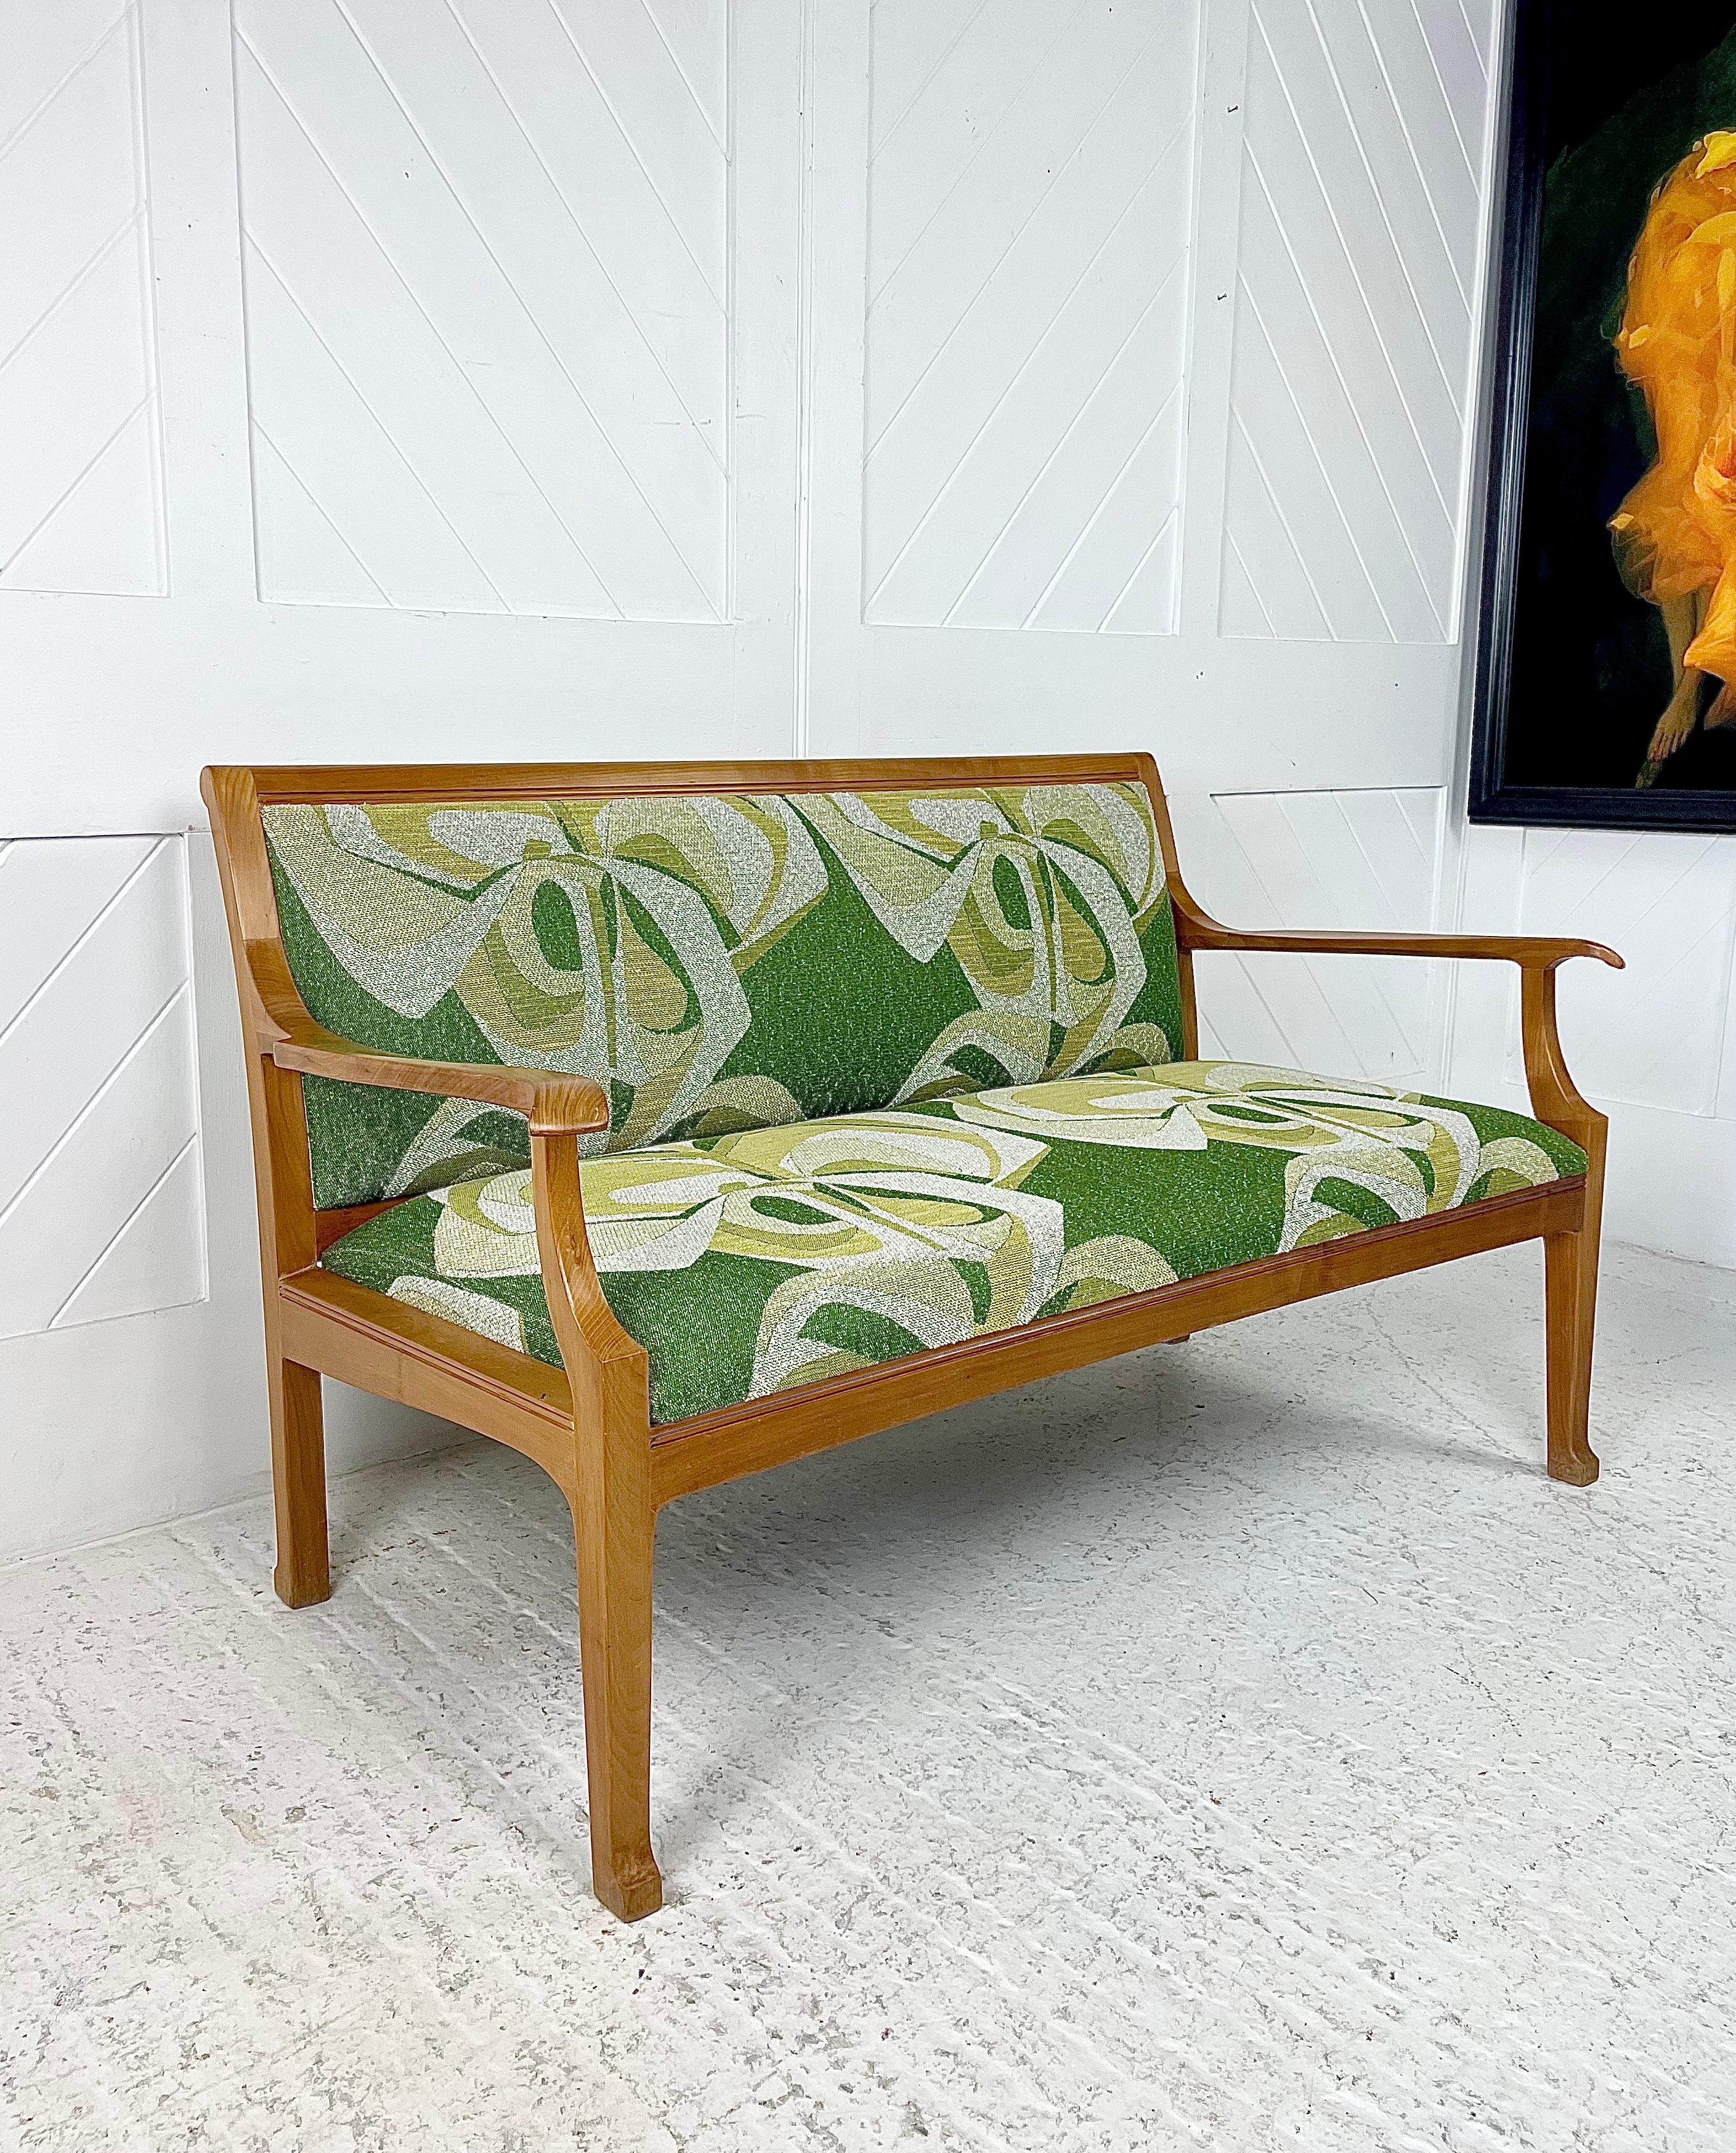 Seventies cherrywood 2 seater settee
By Edward Barnsley
Circa 1979 with original receipt

Re-upholstered in Edinburgh Weavers fabric ‘Kabadi”
Designed by John Wright 1968 - jacquard weave rayon and cotton
Circa 1979 with original receipt

Edward